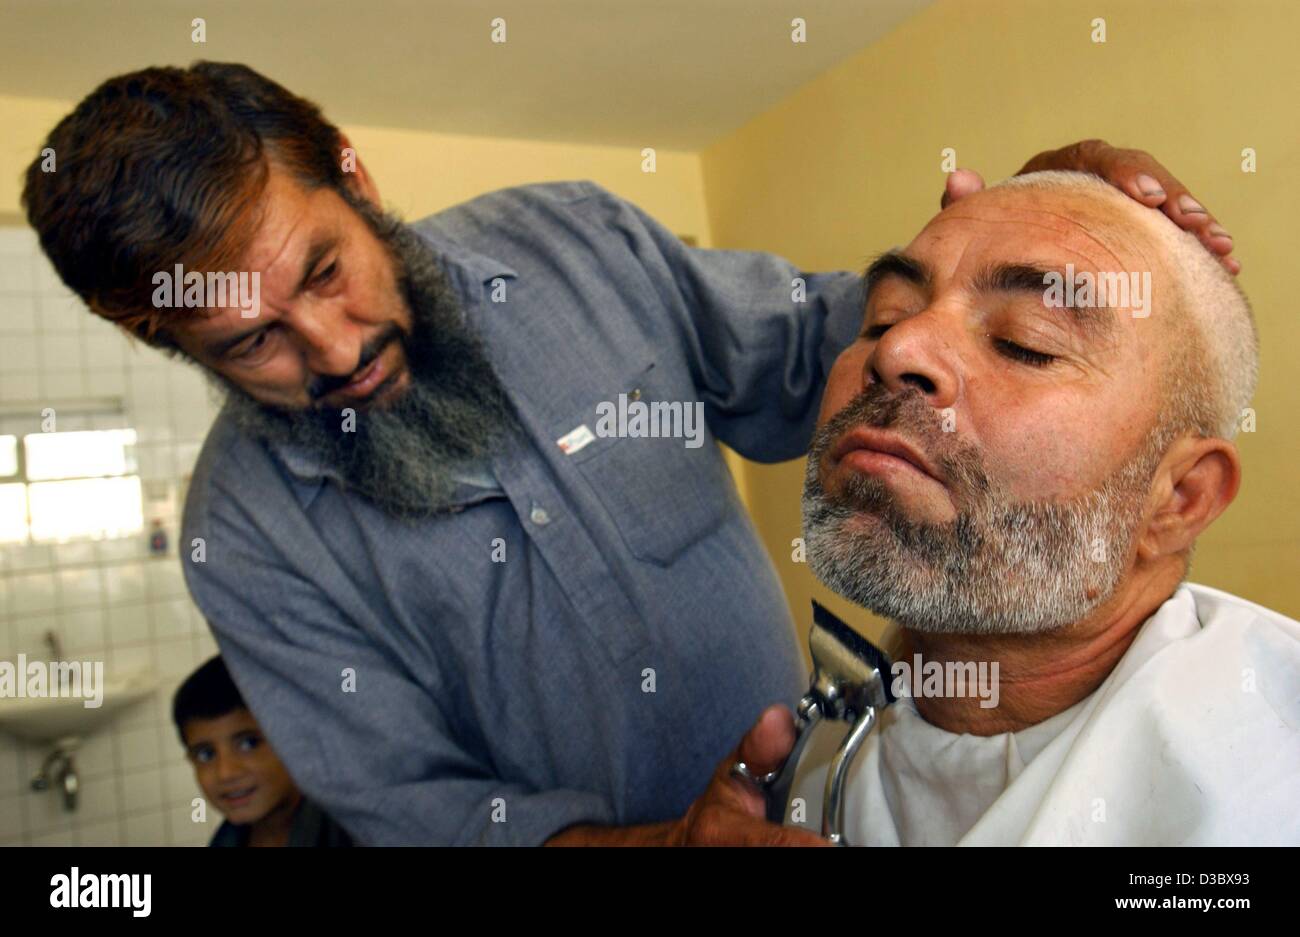 (dpa) - An Afghan man has his beard trimmed in a barber shop in Kabul, Afghanistan, 4 August 2003. Stock Photo